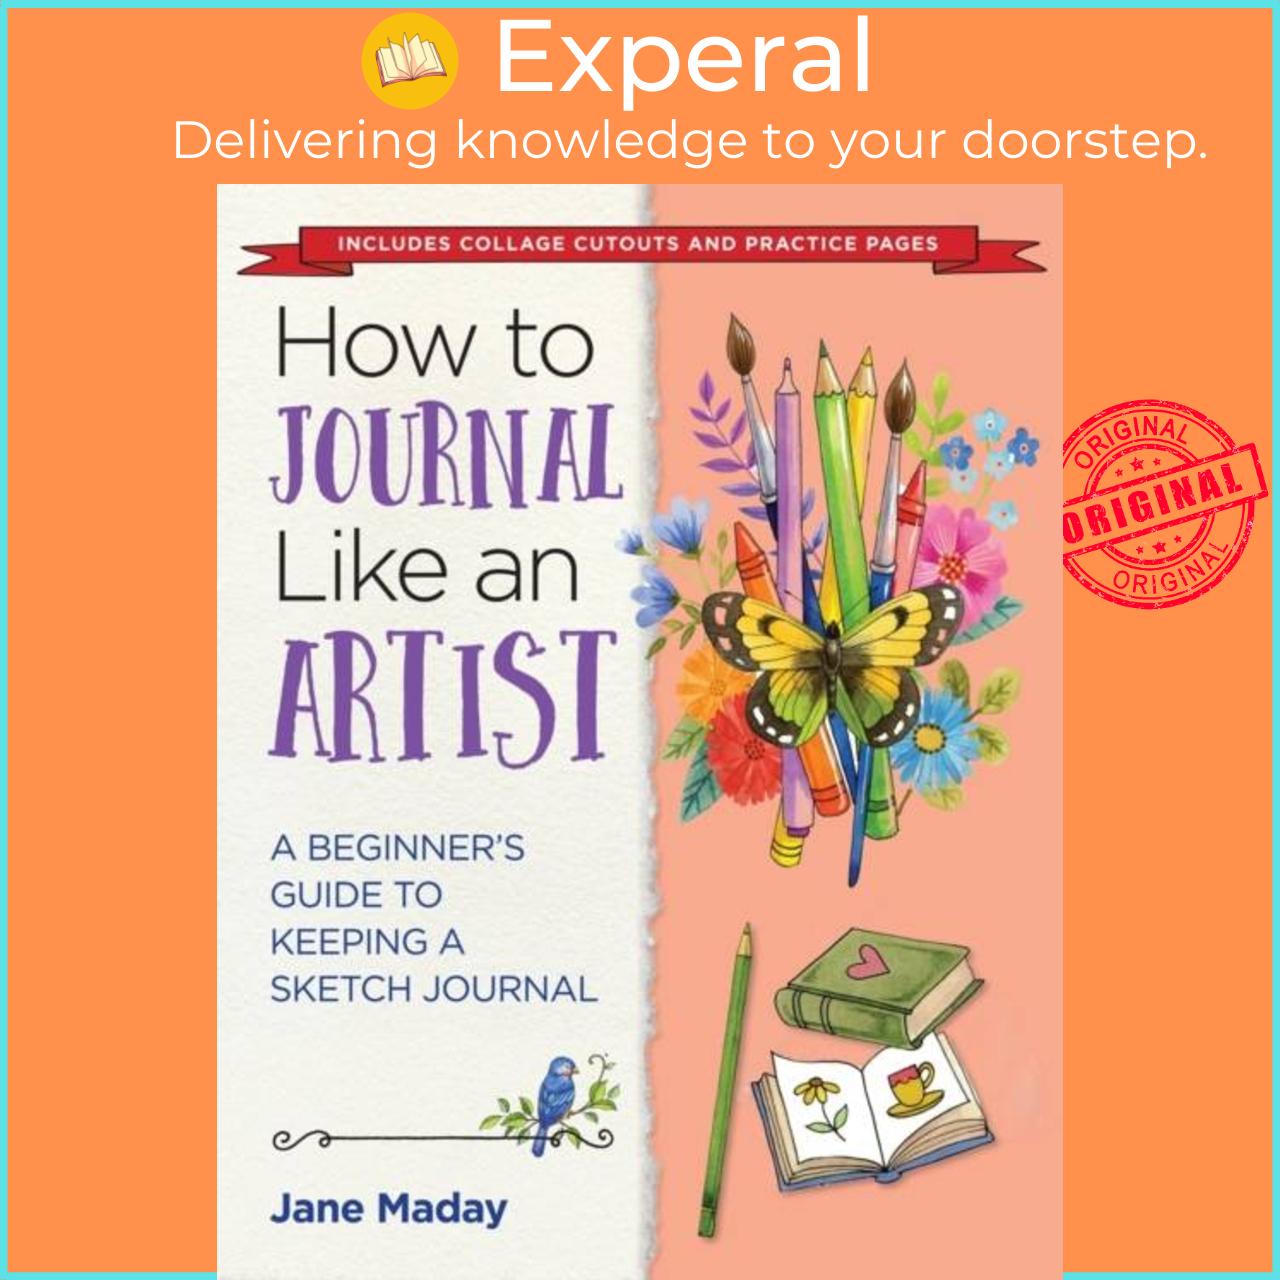 Sách - How to Journal Like an Artist - A Beginner's Guide to Keeping a Sketch Jour by Jane Maday (UK edition, paperback)